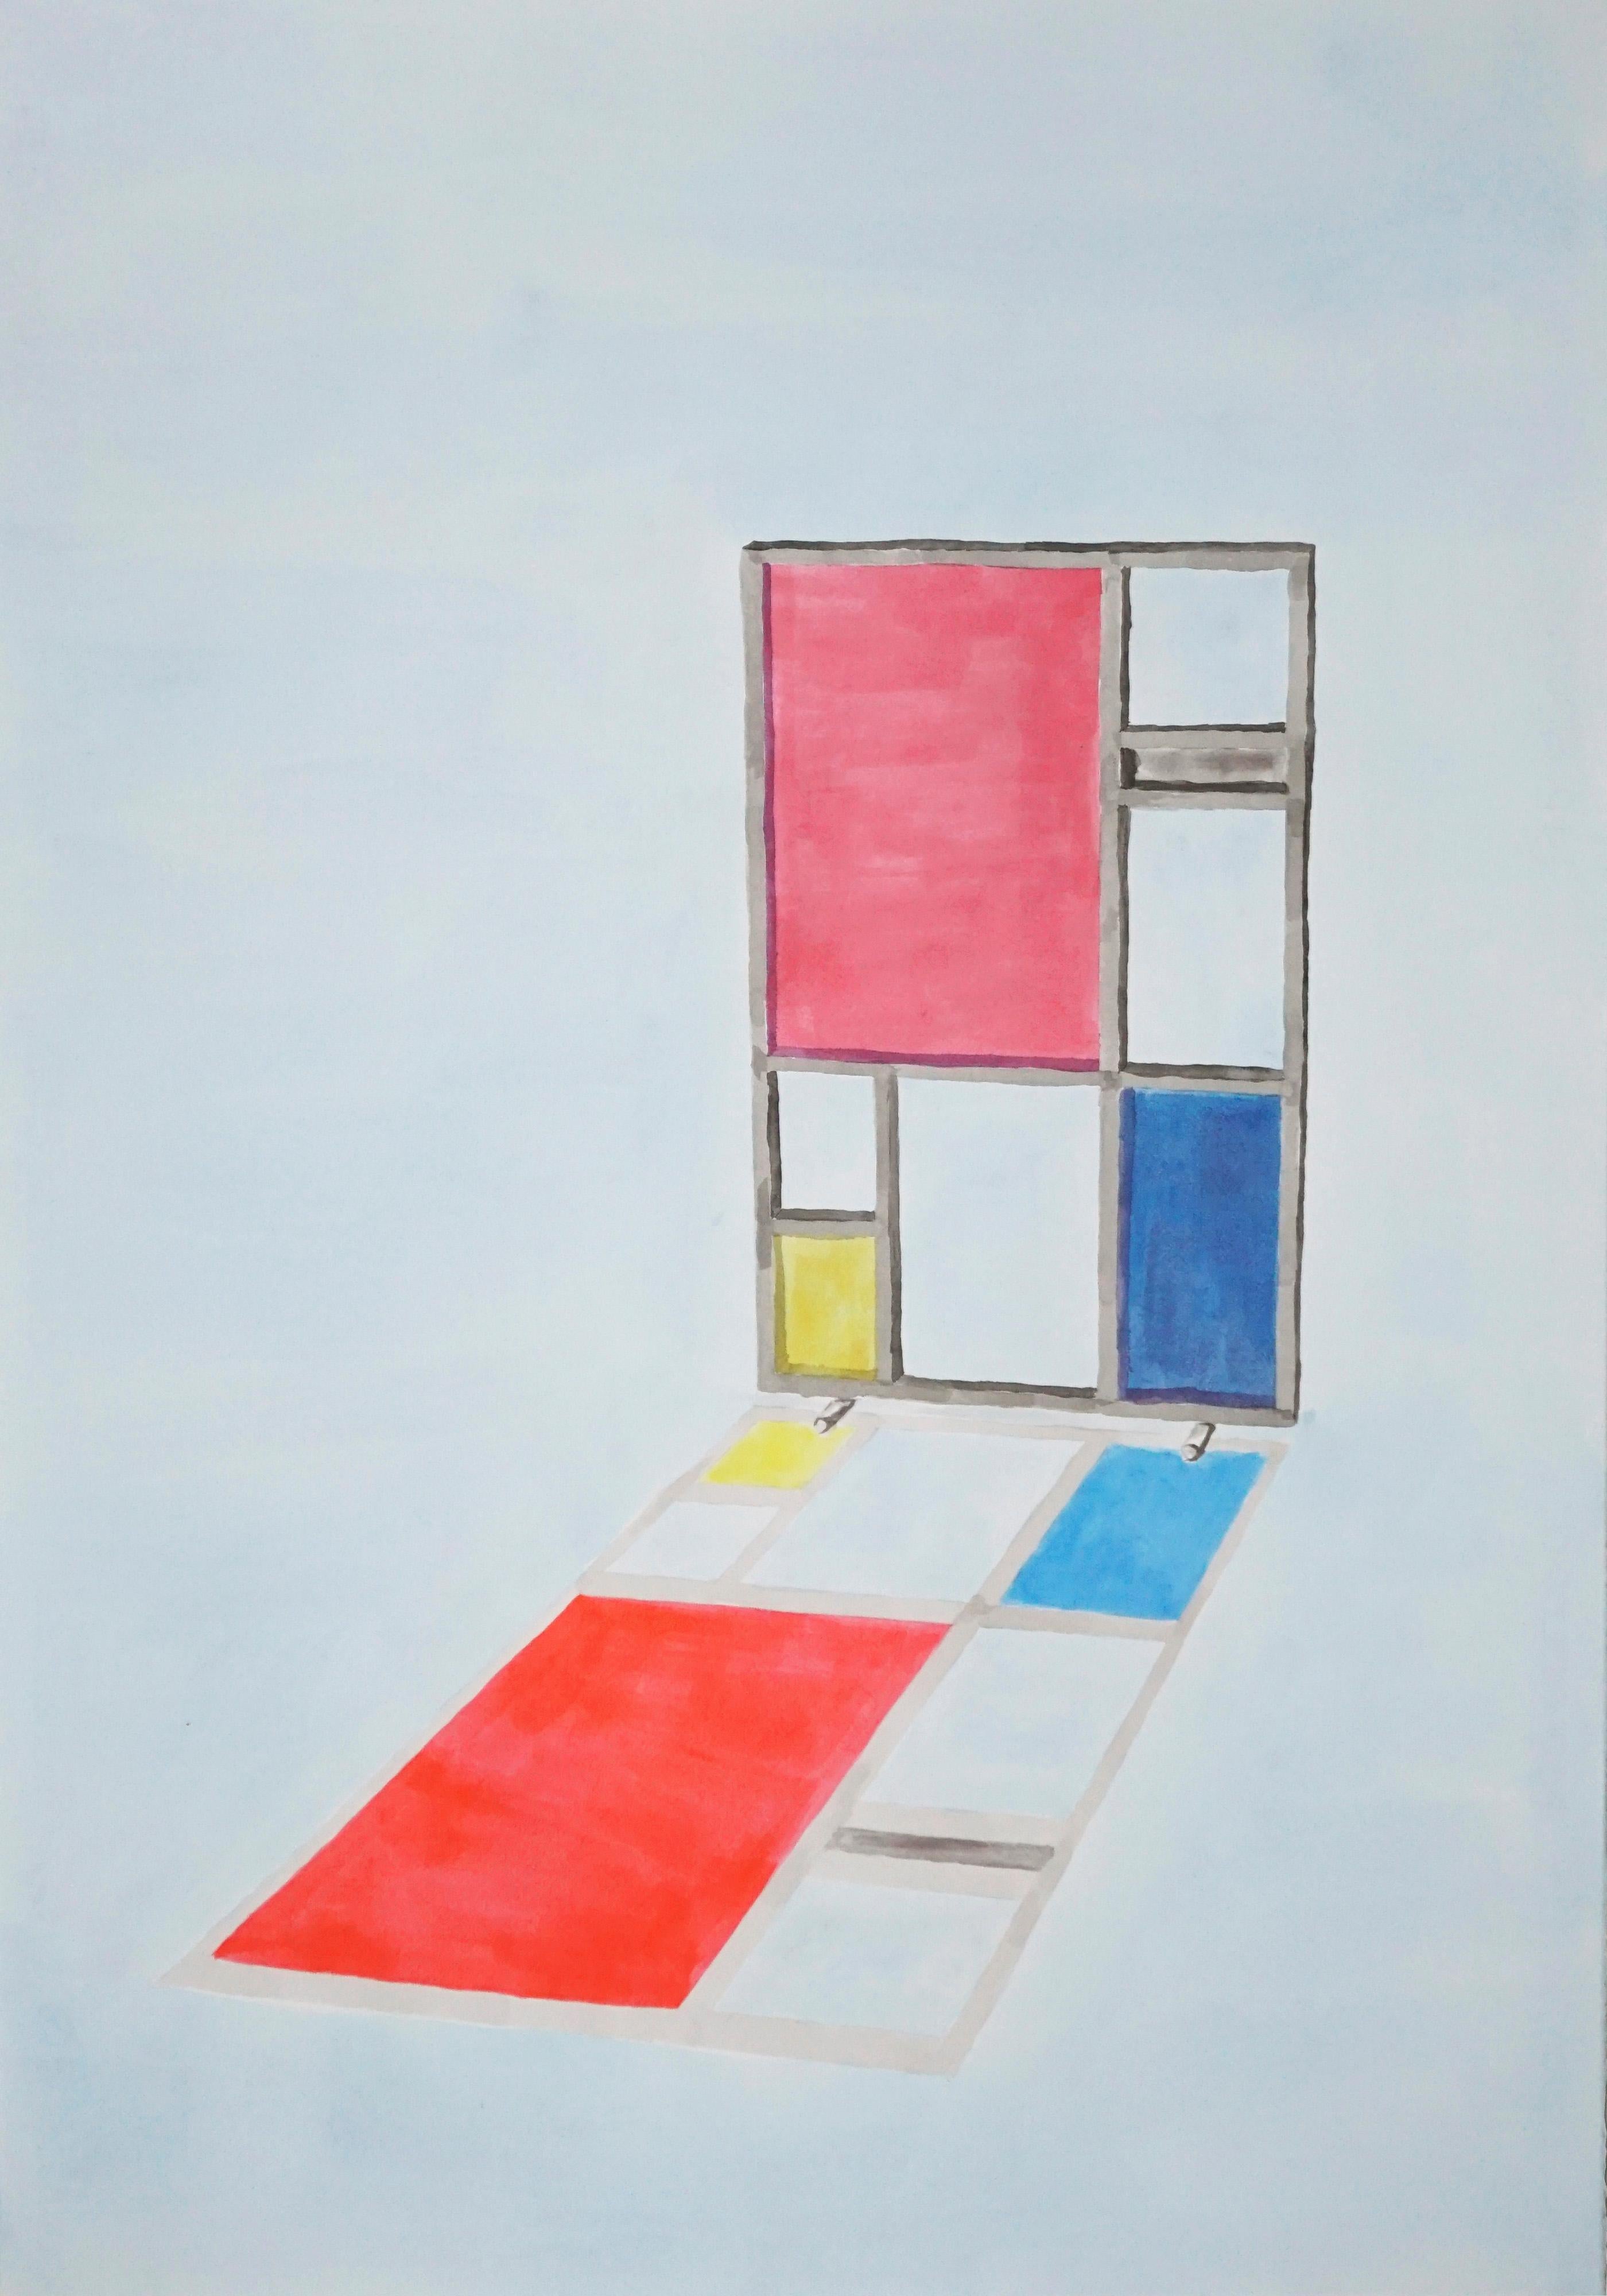 Ryan Rivadeneyra Figurative Painting - Mondrian Screen Divider, Contemporary Painting on Paper, Modern Architecture 